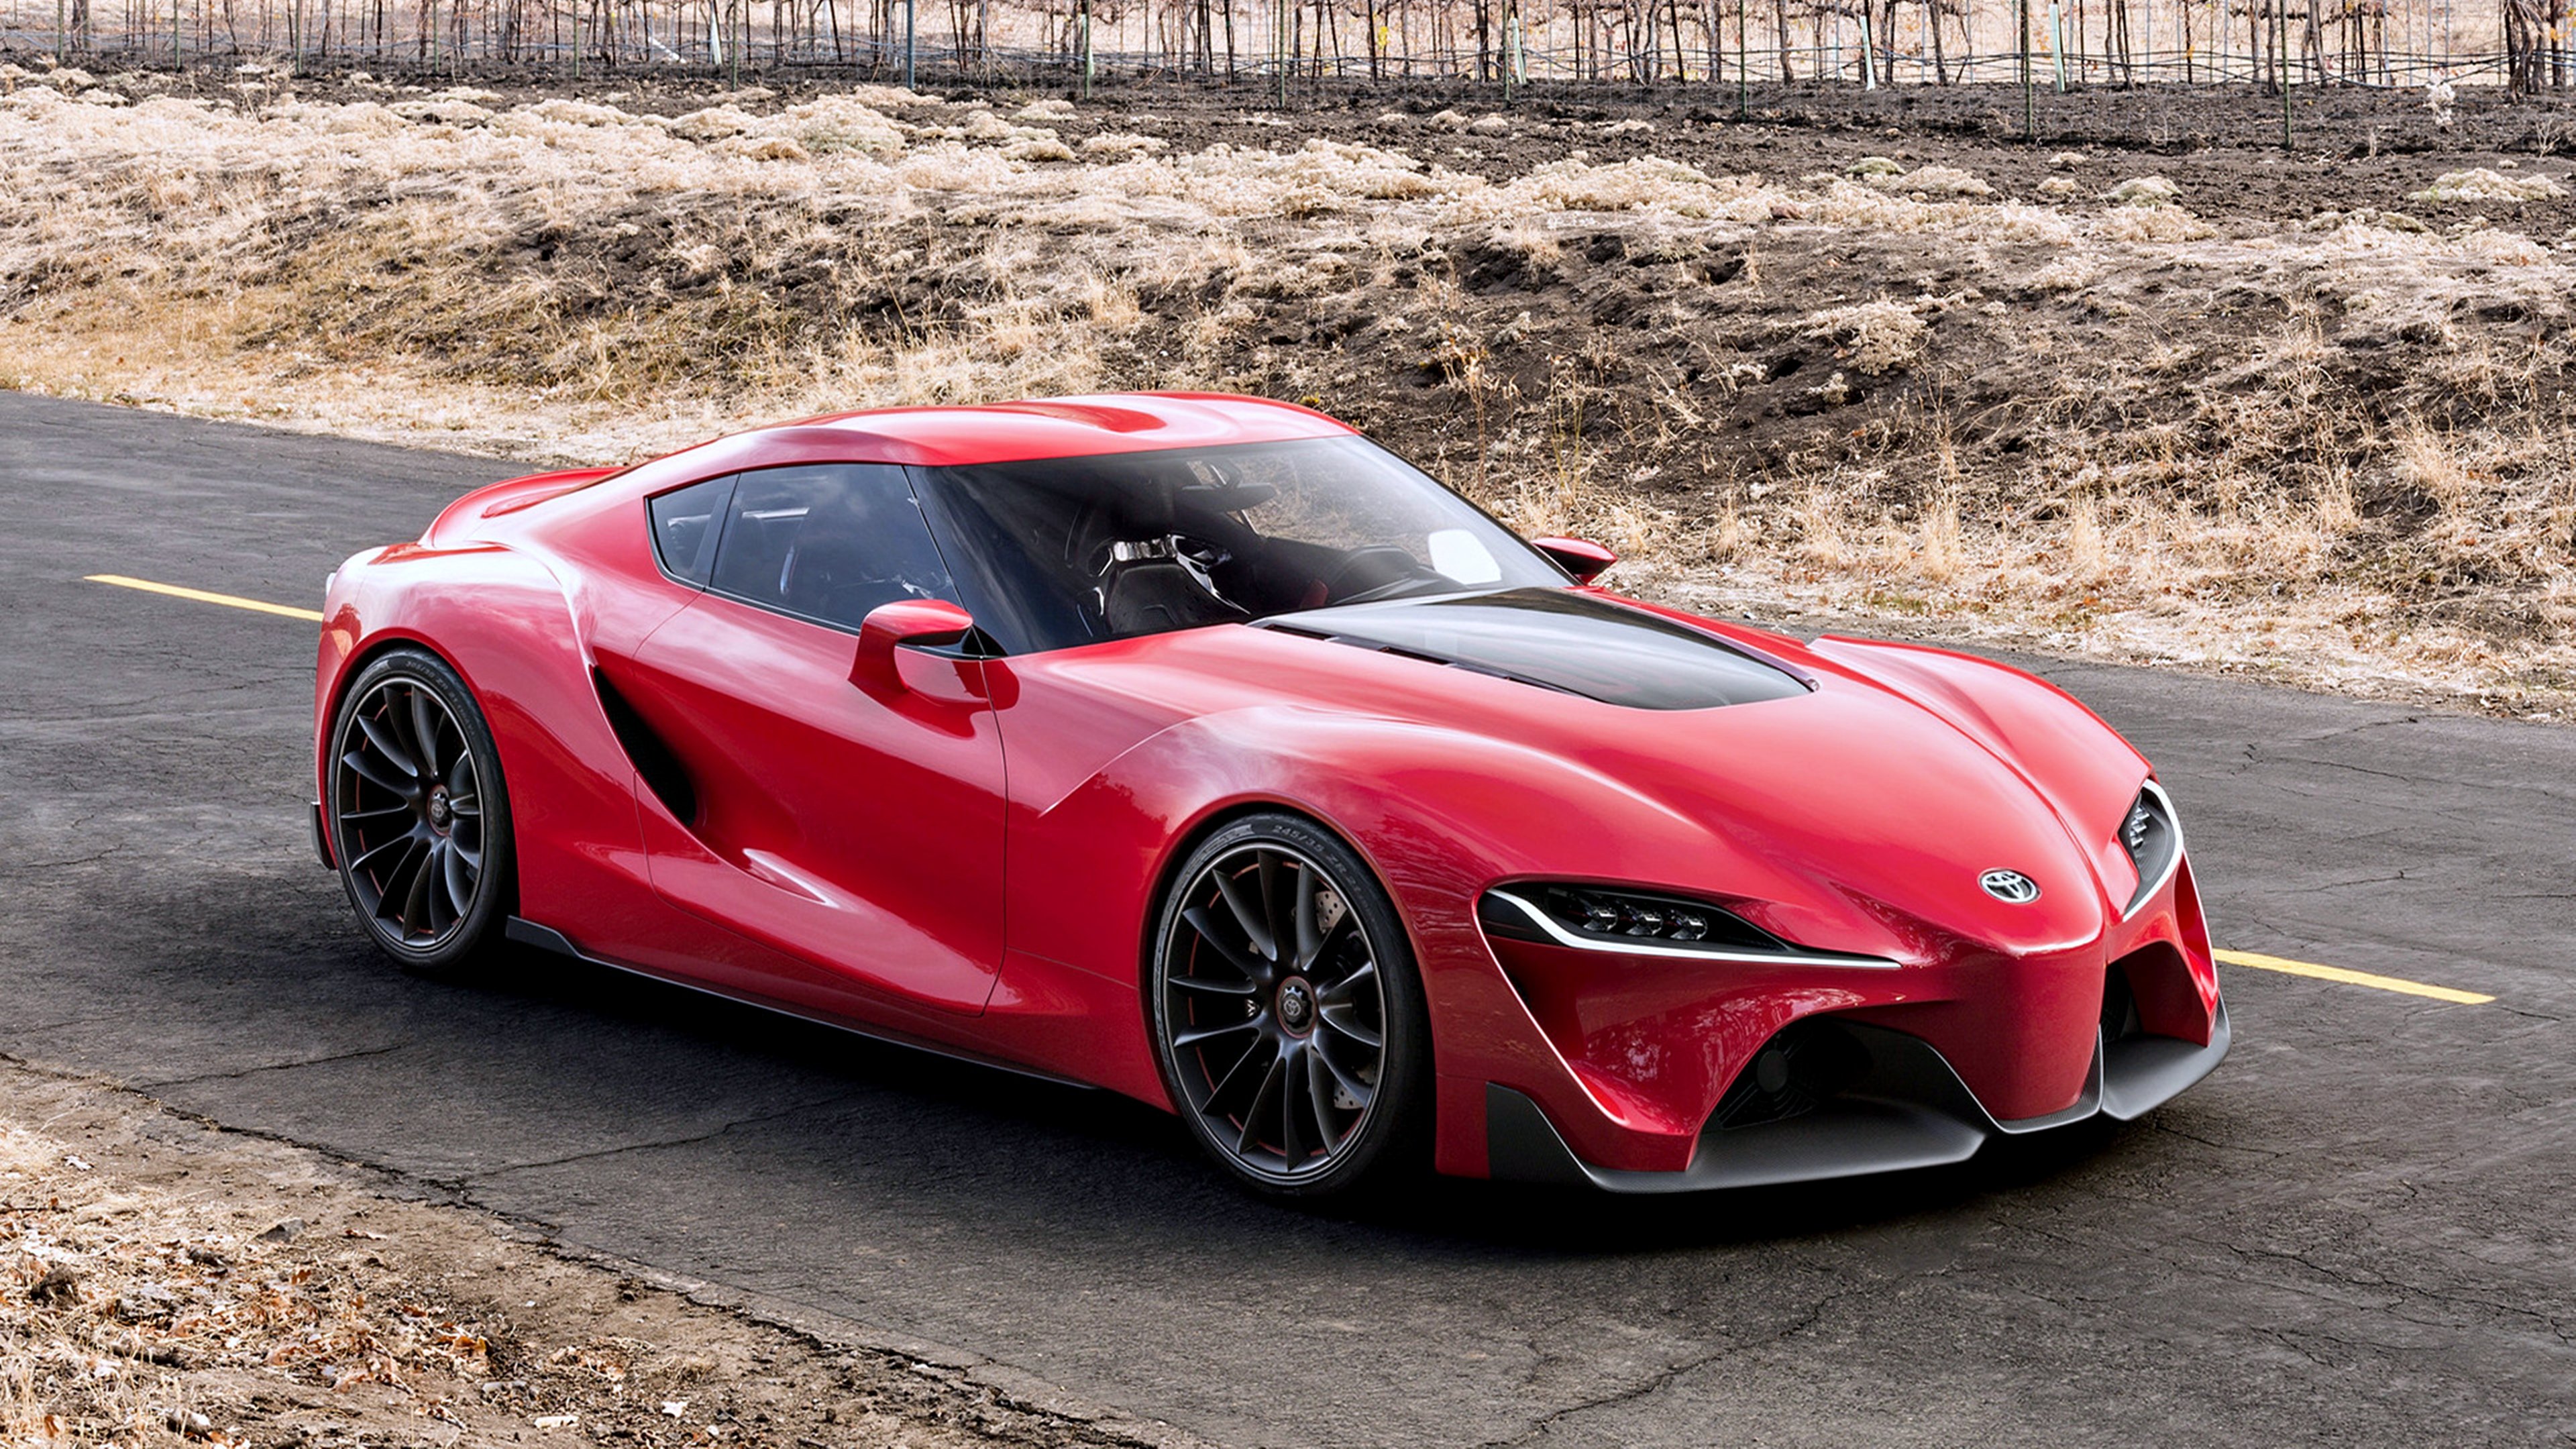 2014, Toyota, Ft 1, Concept, Red, Road, Speed, Race, Supercar, Cars, Motors, Auto Wallpaper